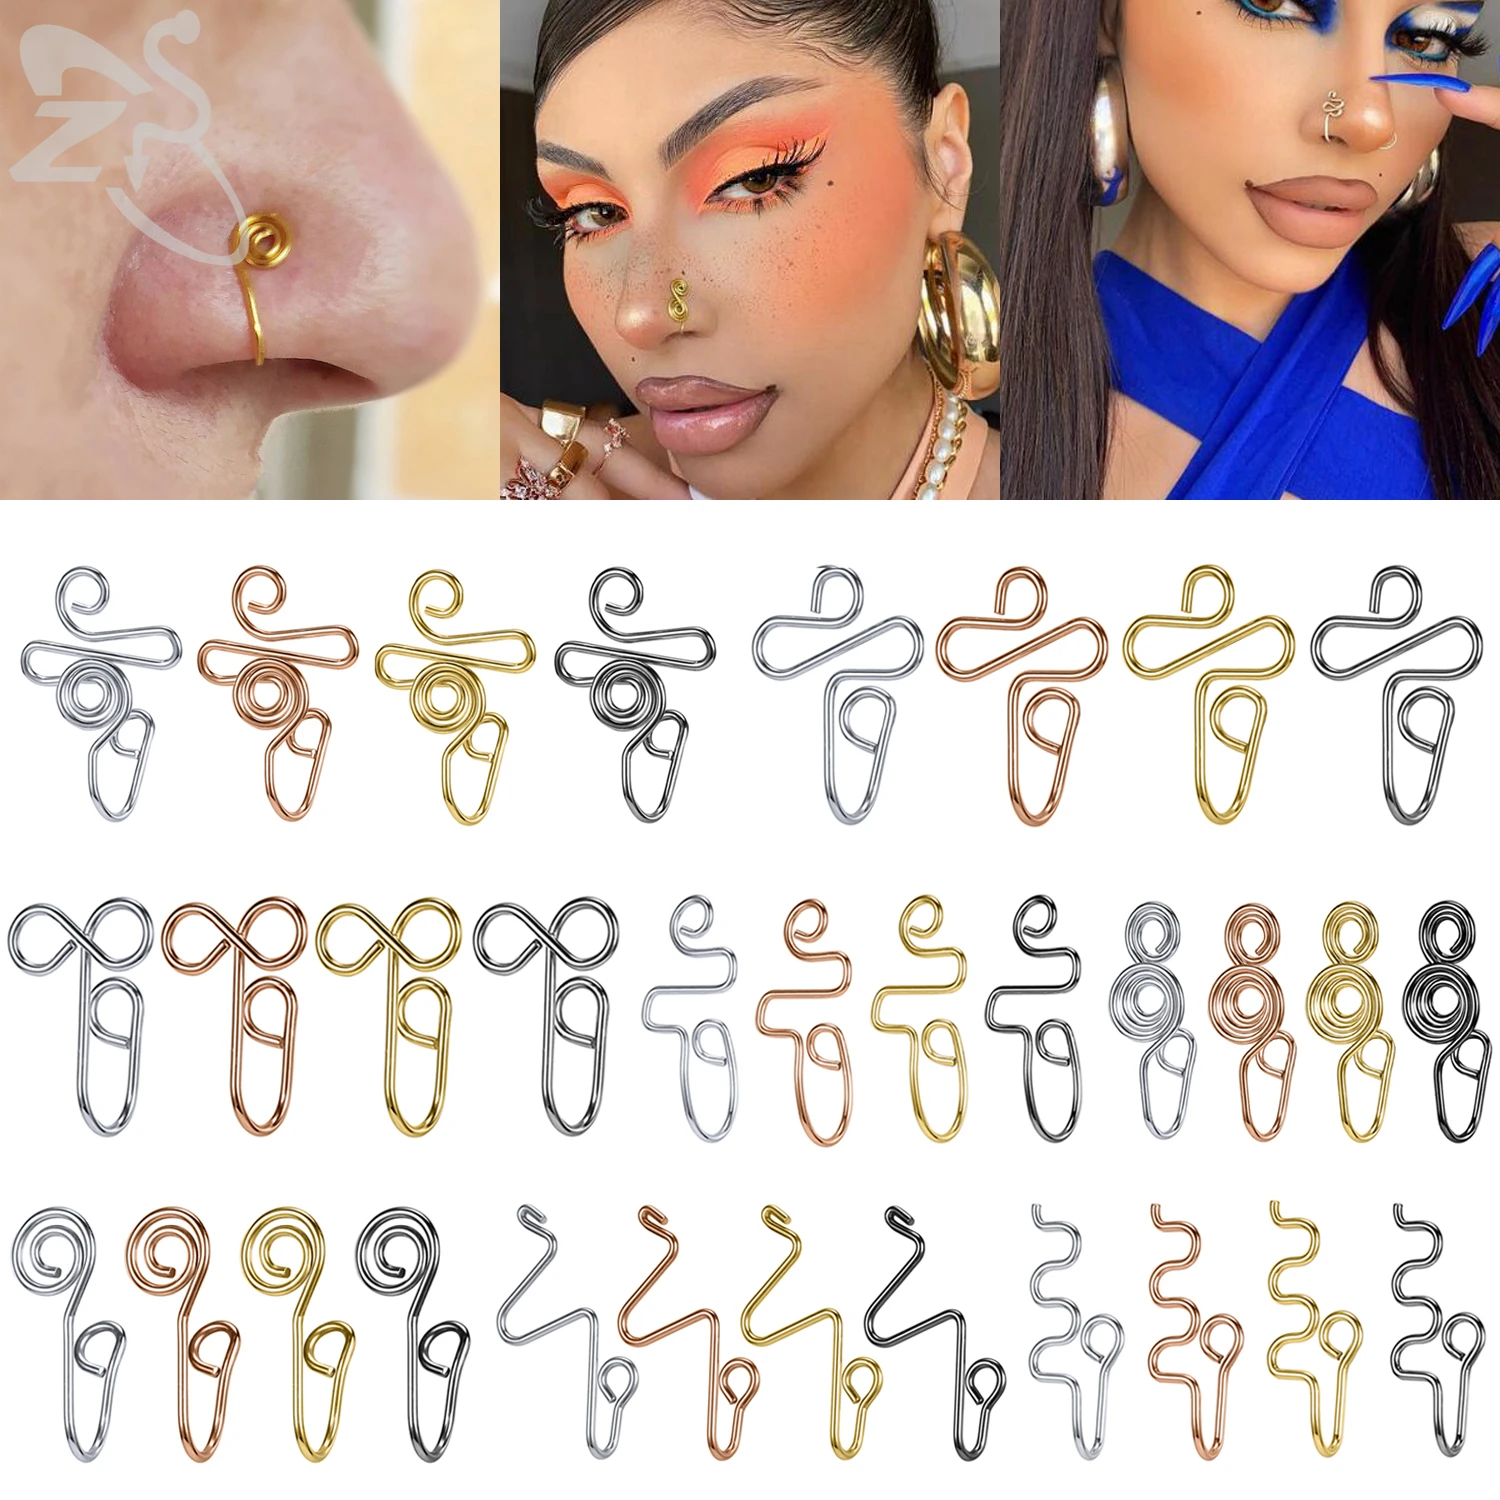 

ZS 1 PC Spiral Stainless Steel Nose Cuff For Women Men Geometric Non Piercing Nose Ring 4 Colors Fake Nostril Piercings Jewelry